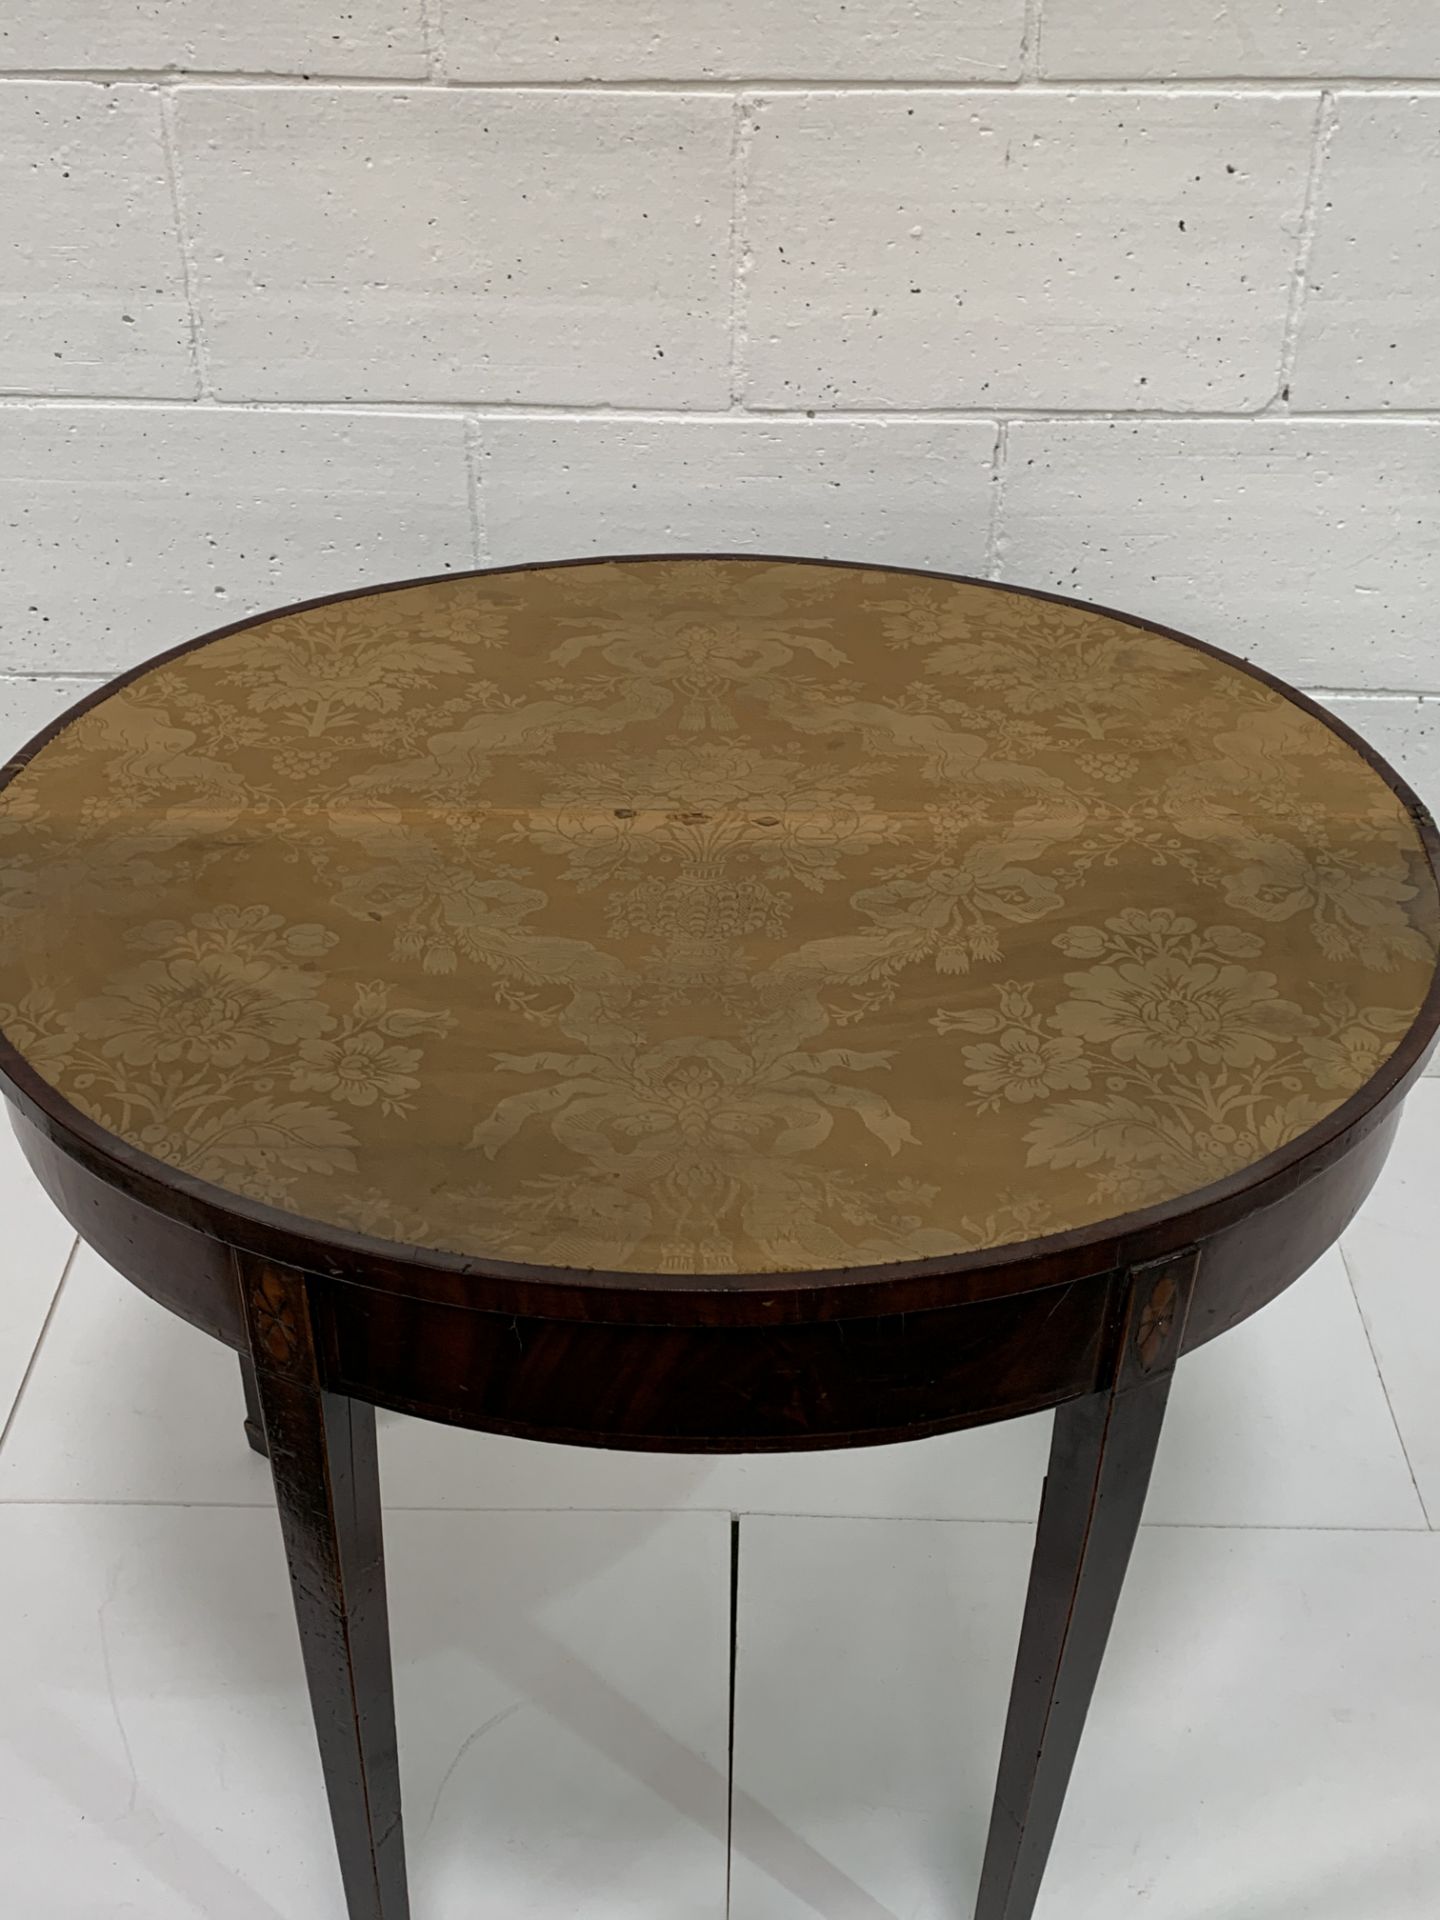 Early 19th Century Inlaid Mahogany Demi-lune tea table. - Image 4 of 4